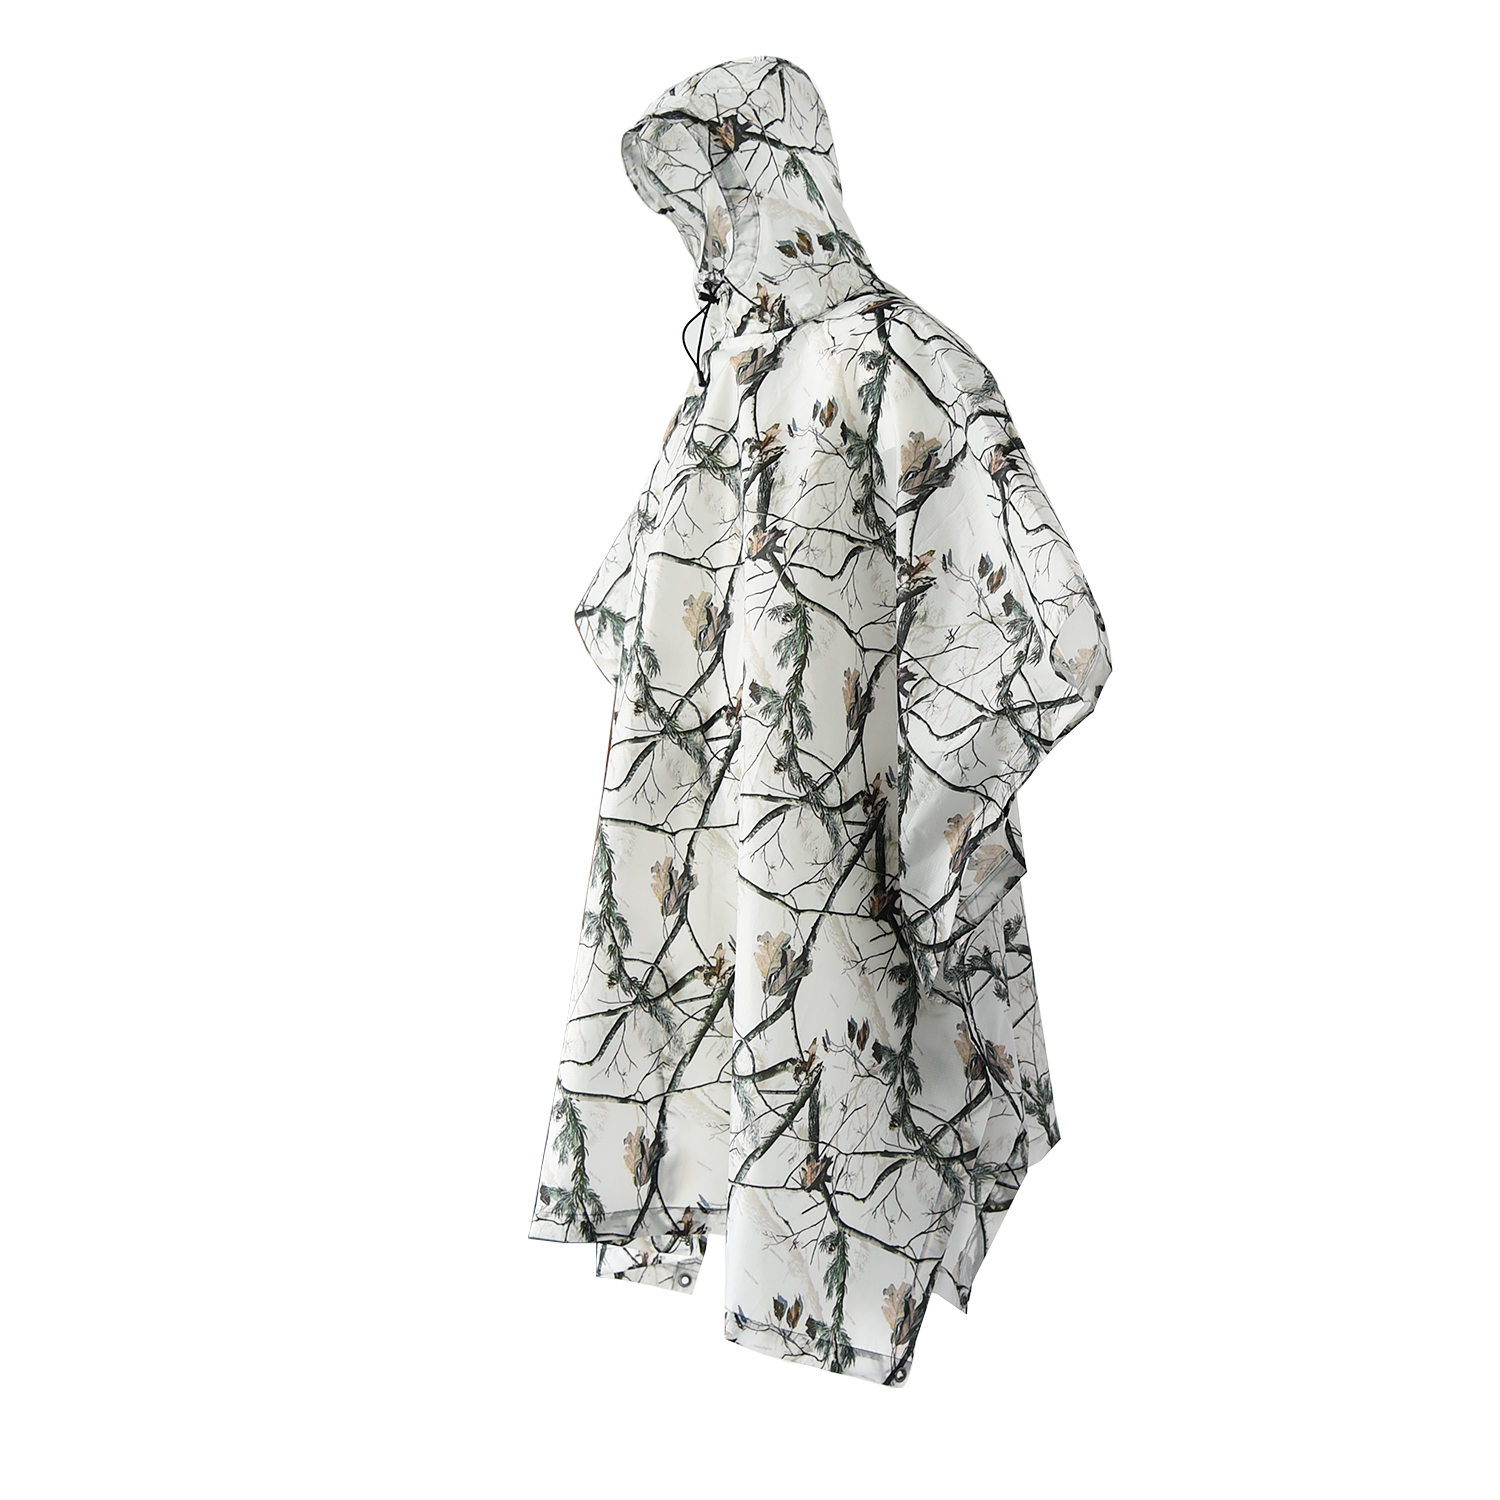 Raincoat-Thicken-Men-And-Women-Available-Snow-Camo-Climbing-Moisture-proof-Camouflage-1279251-3